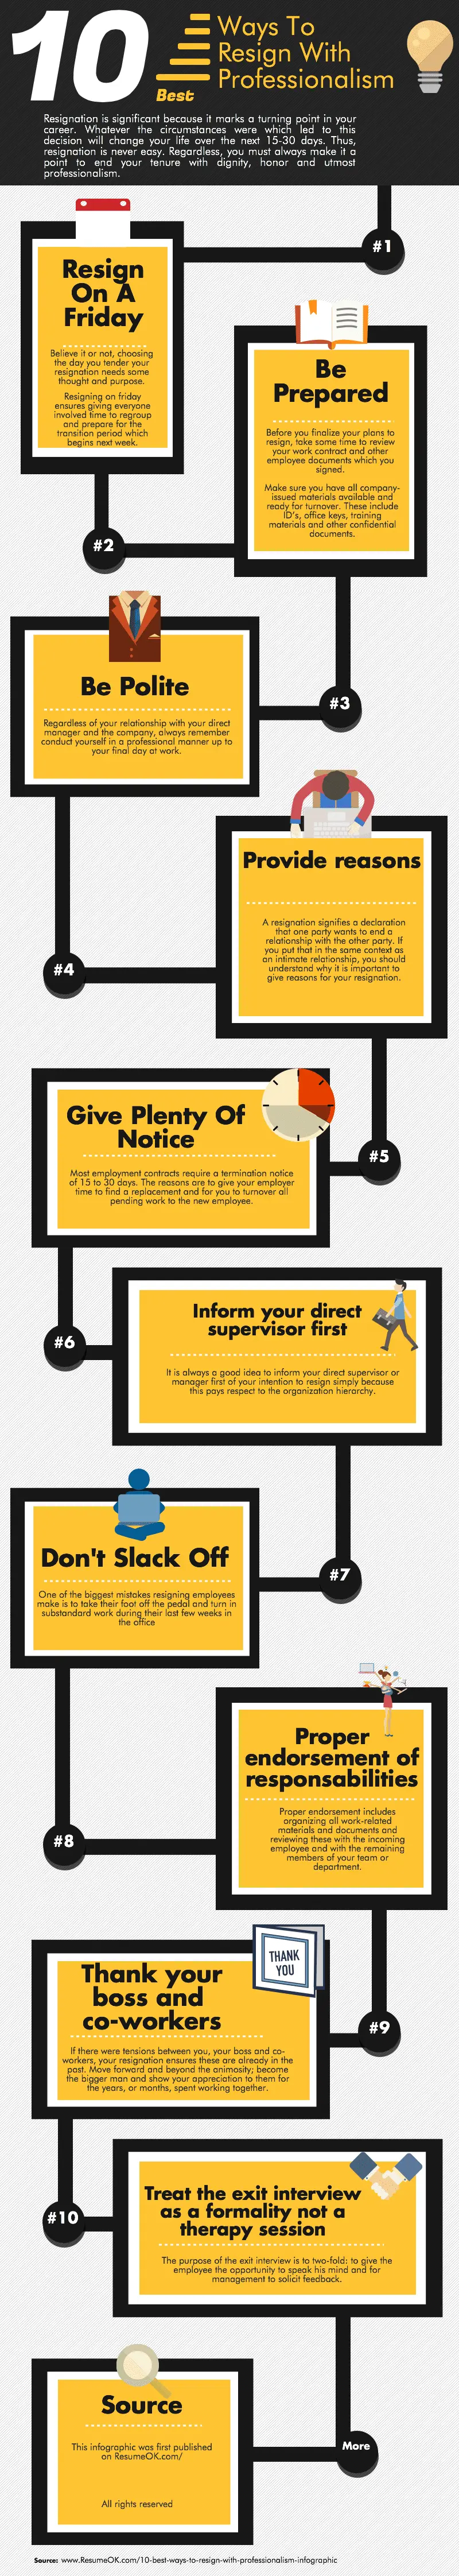 10 ways to resign professionally infographic